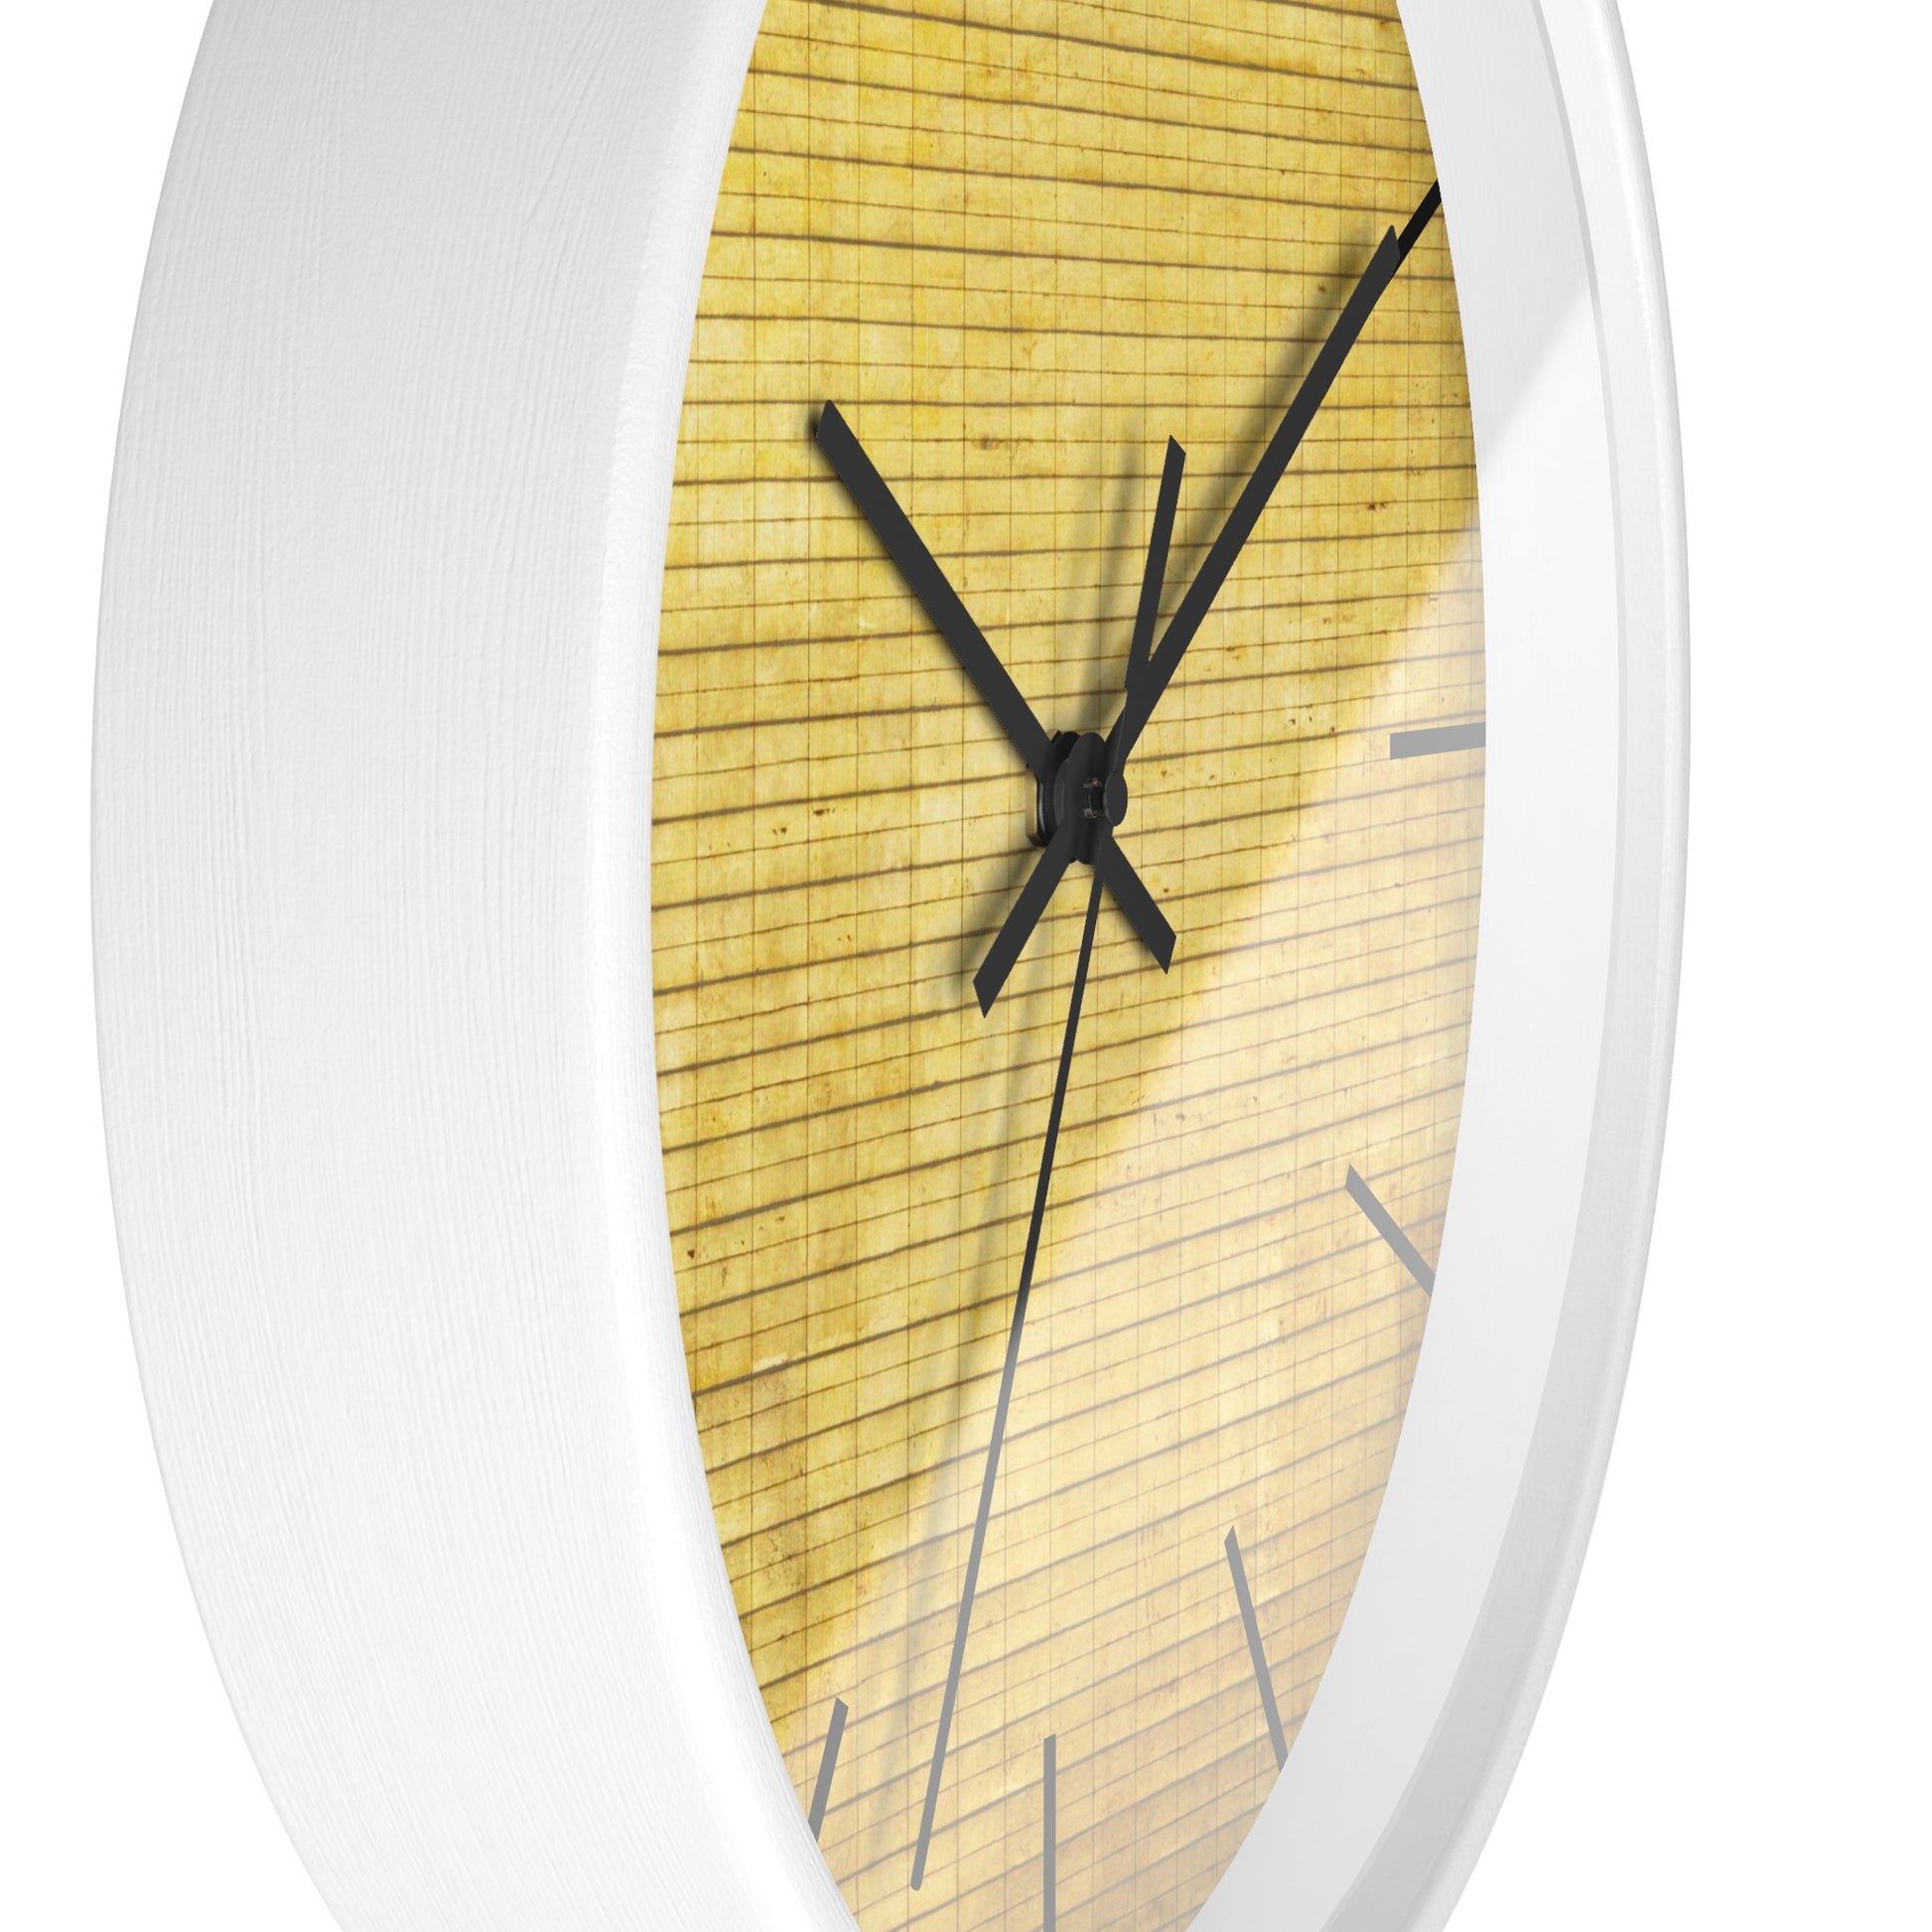 a close up of a clock on a white wall